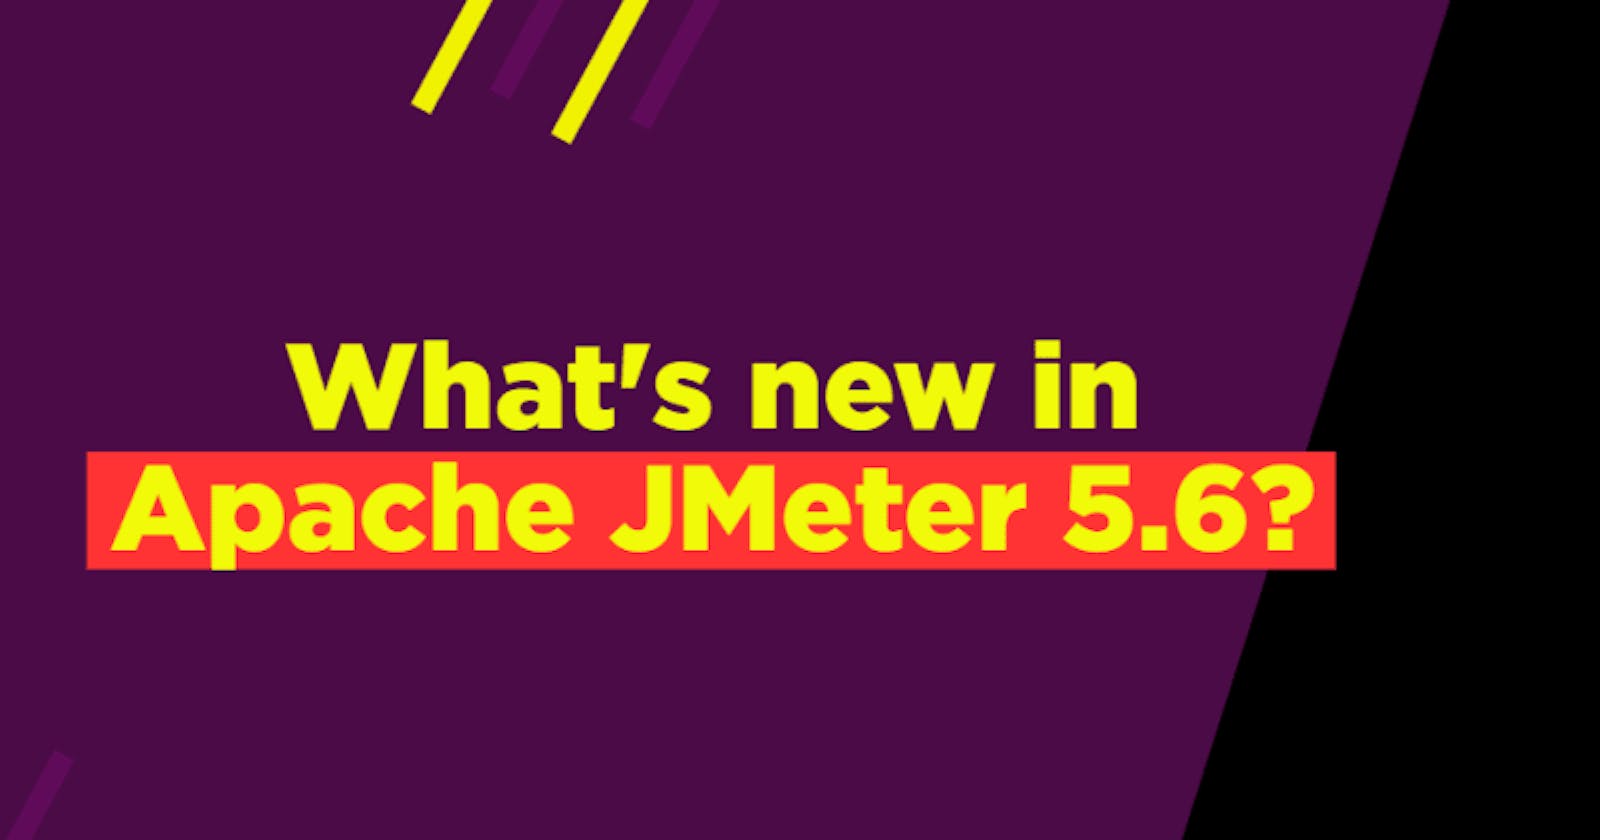 What's new in Apache JMeter 5.6?